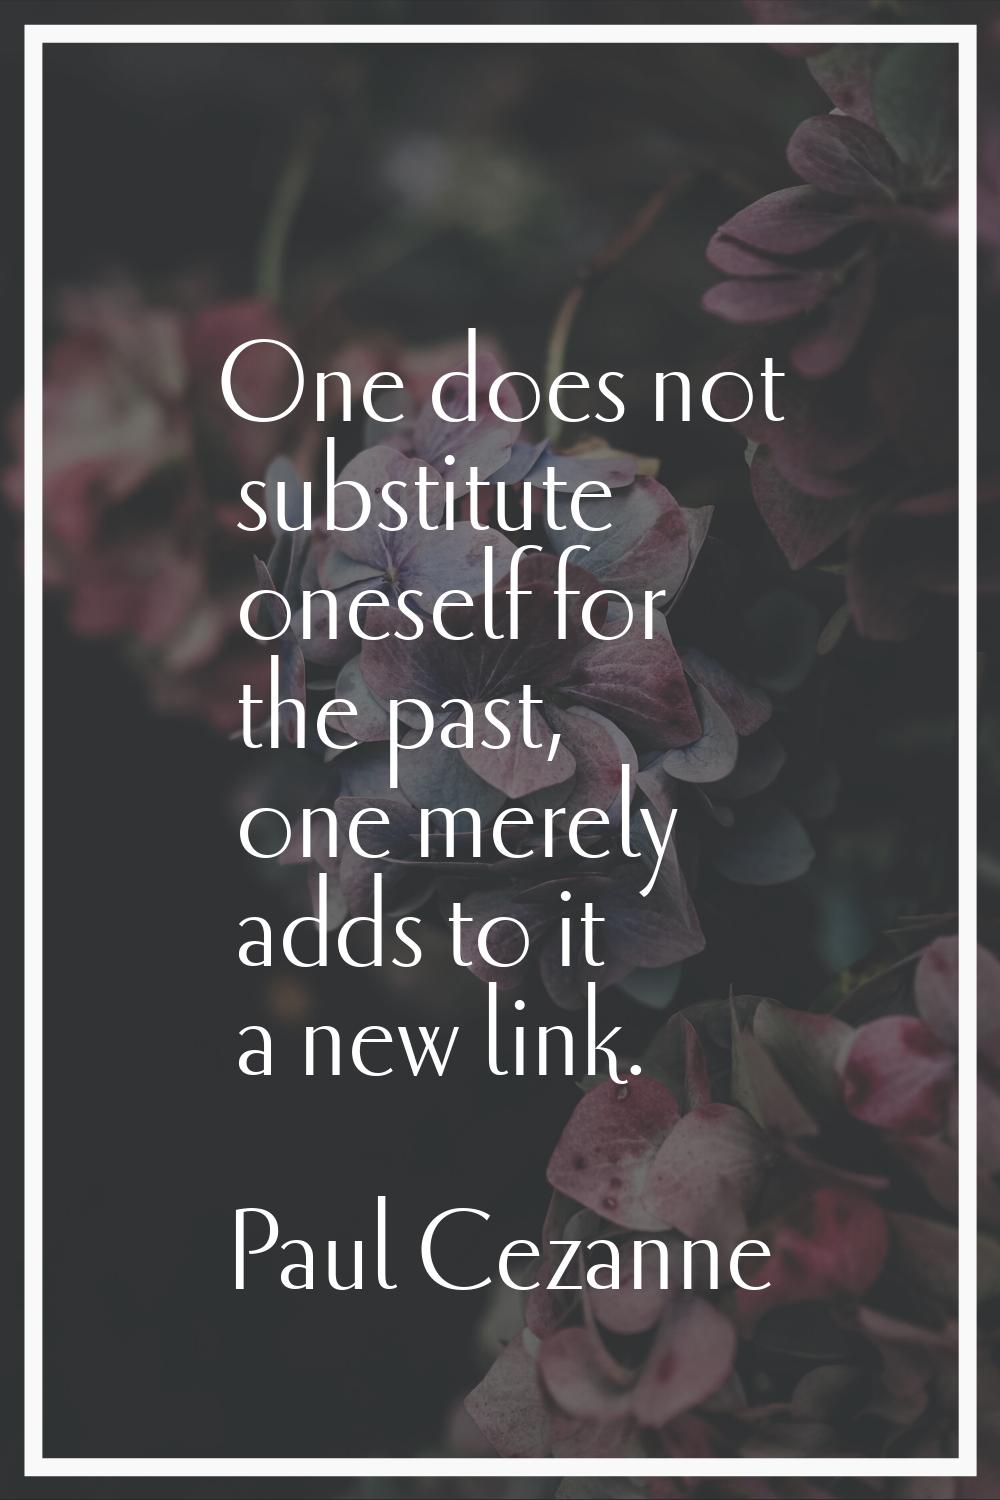 One does not substitute oneself for the past, one merely adds to it a new link.